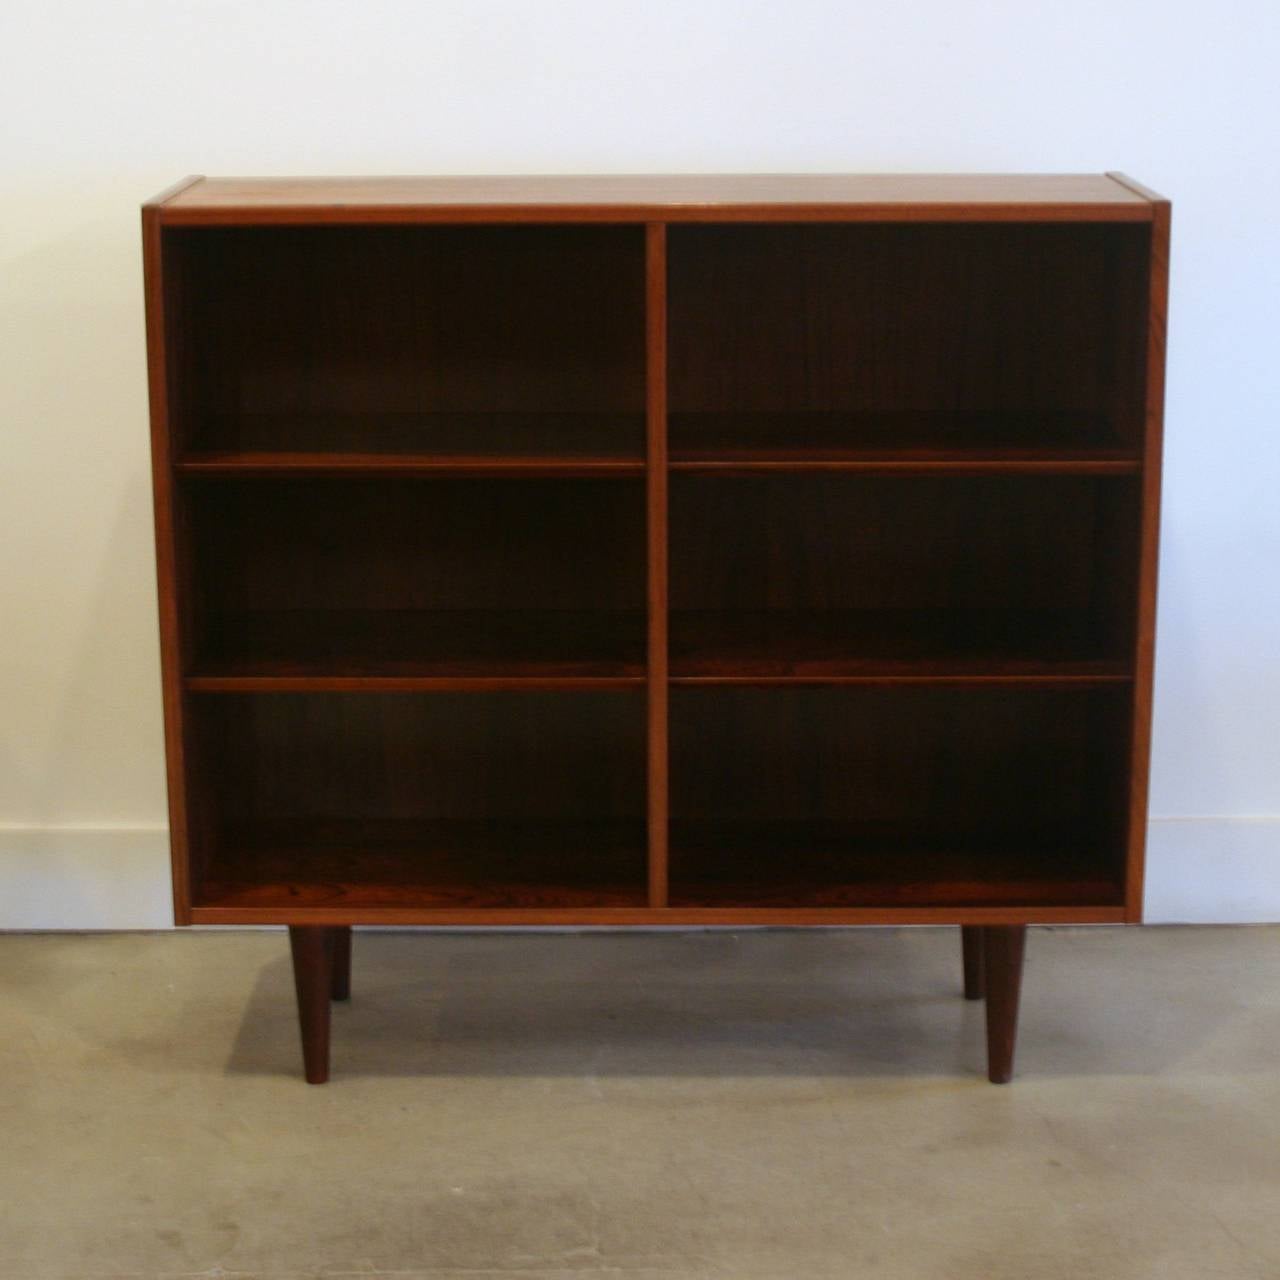 Stunning low rosewood bookcase with four adjustable beveled edged shelves. Resting on solid conical legs.